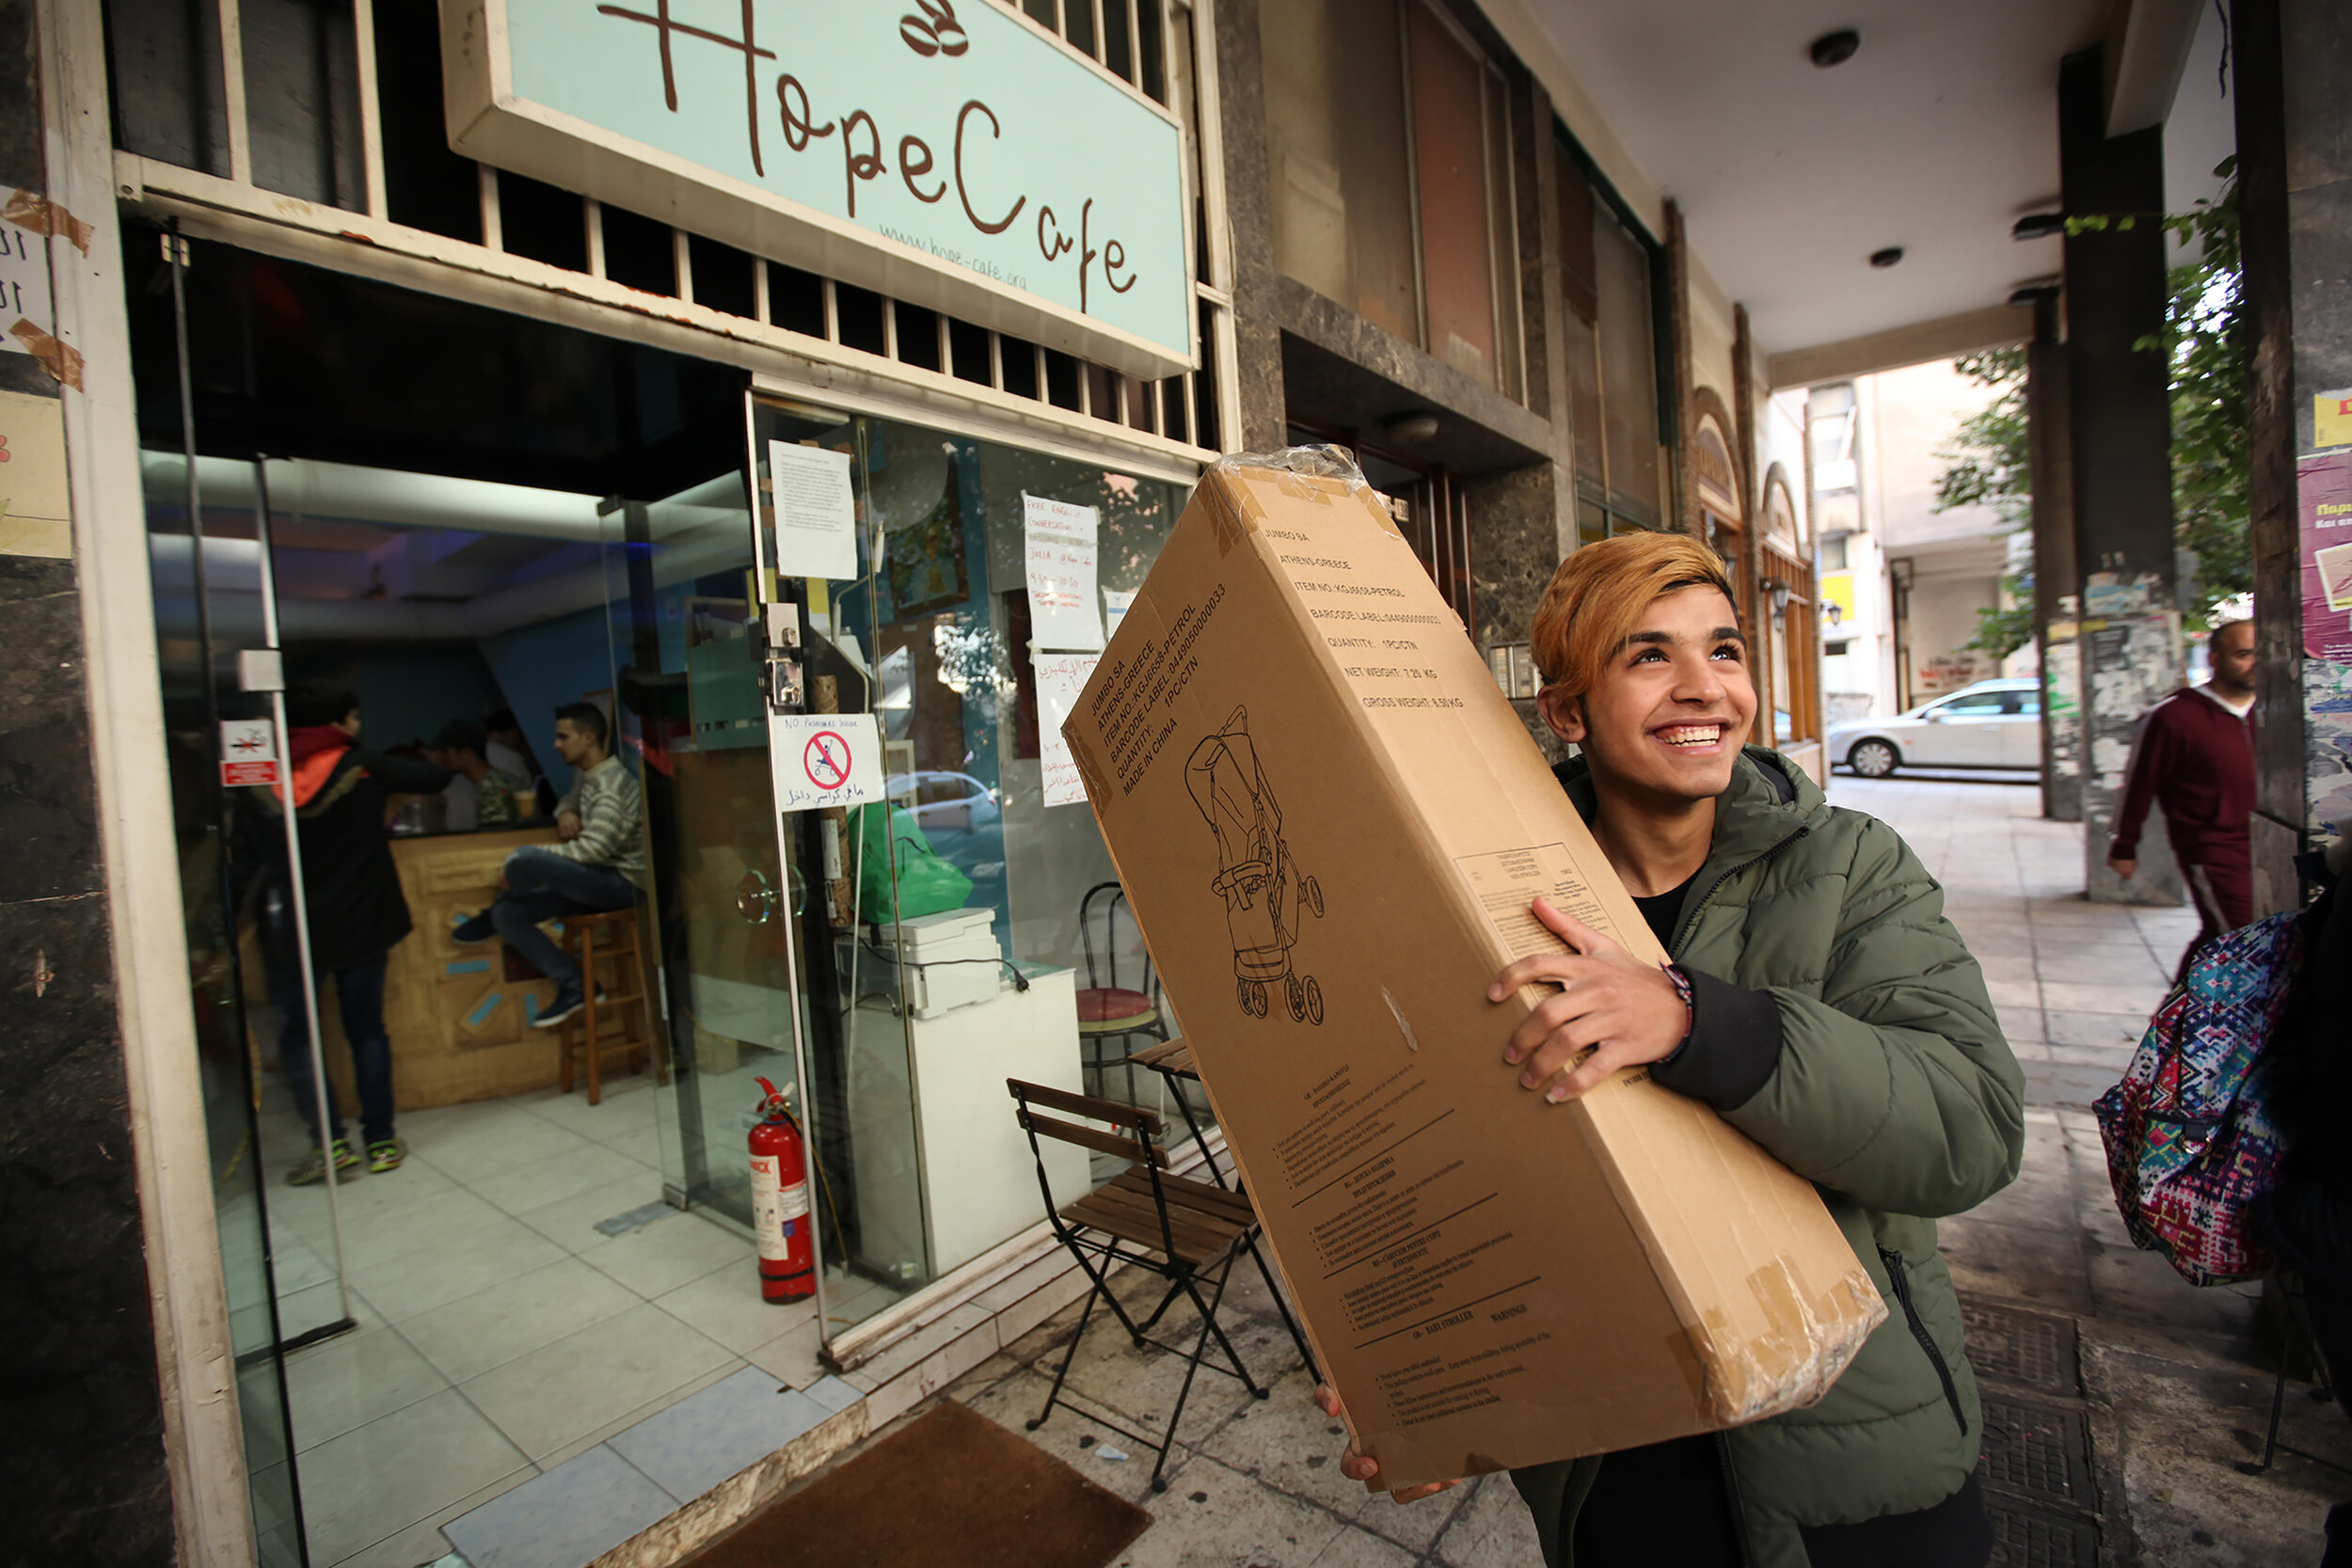  Volunteer and refugee Rami unloads one of the 7 new strollers donated by Allied Aid to Hope Cafe for refugees in Athens, Greece. 